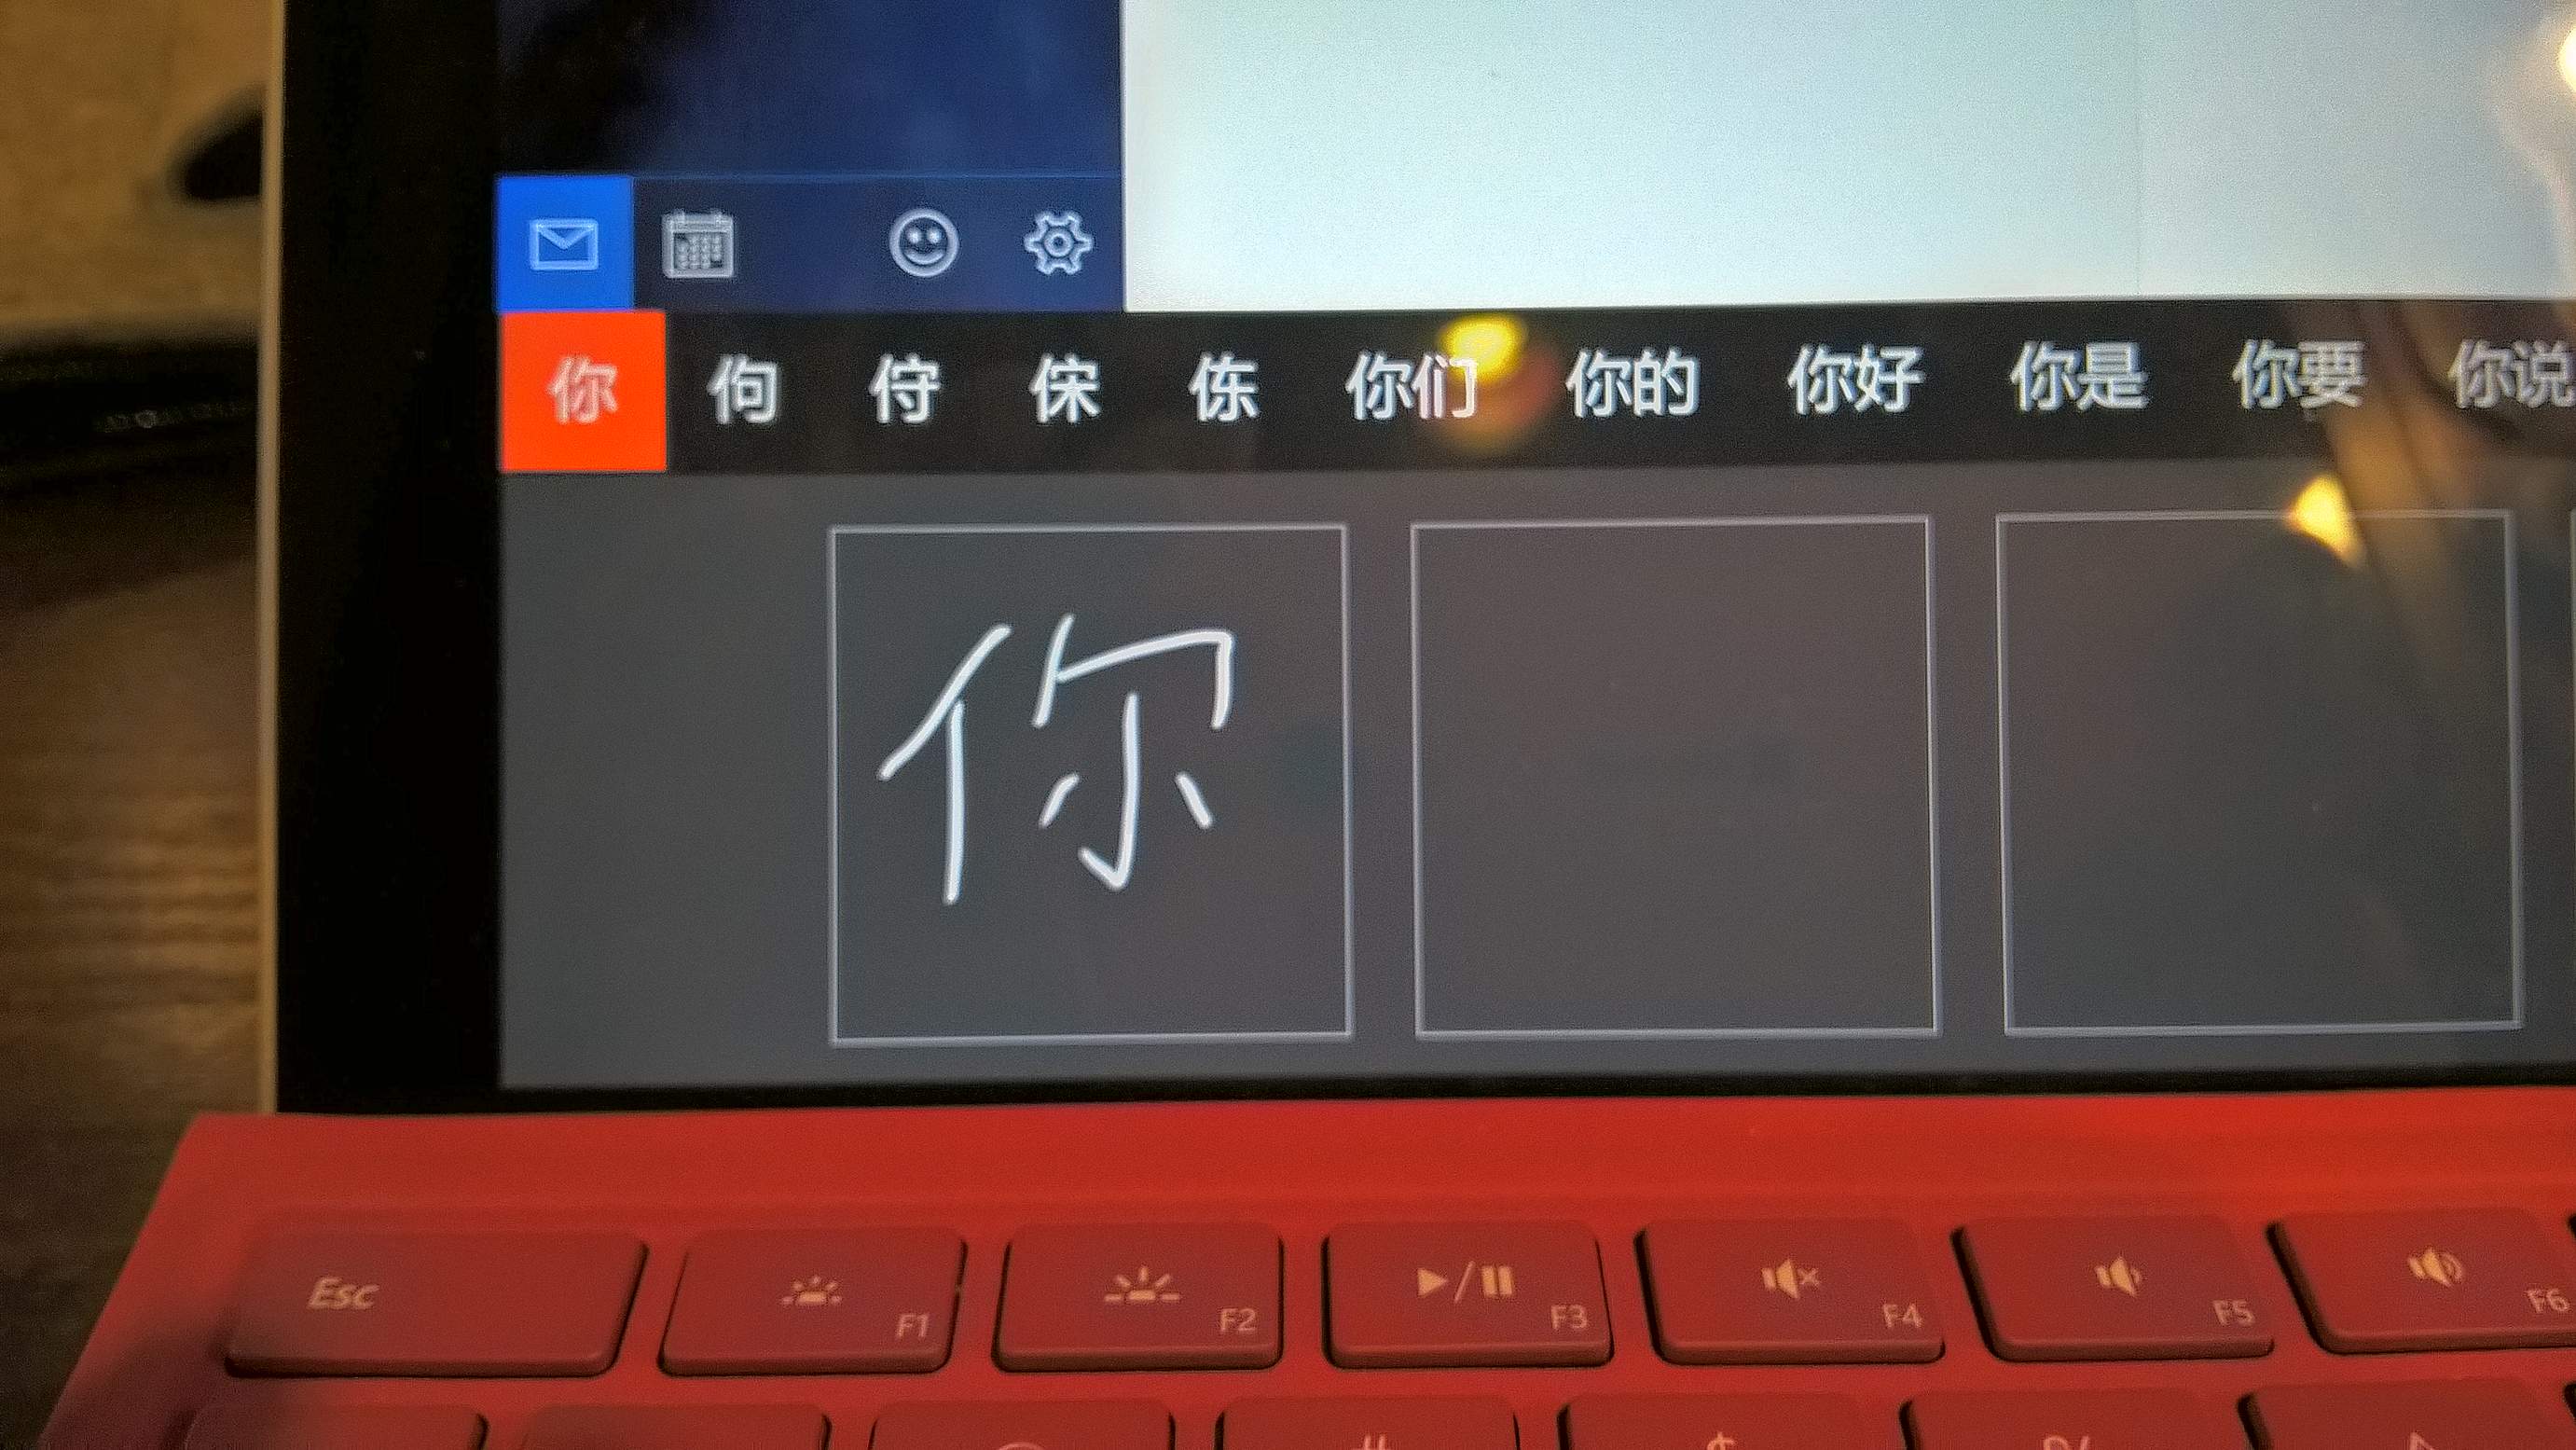 ni, Chinese character for you, Microsoft Surface Pro 4